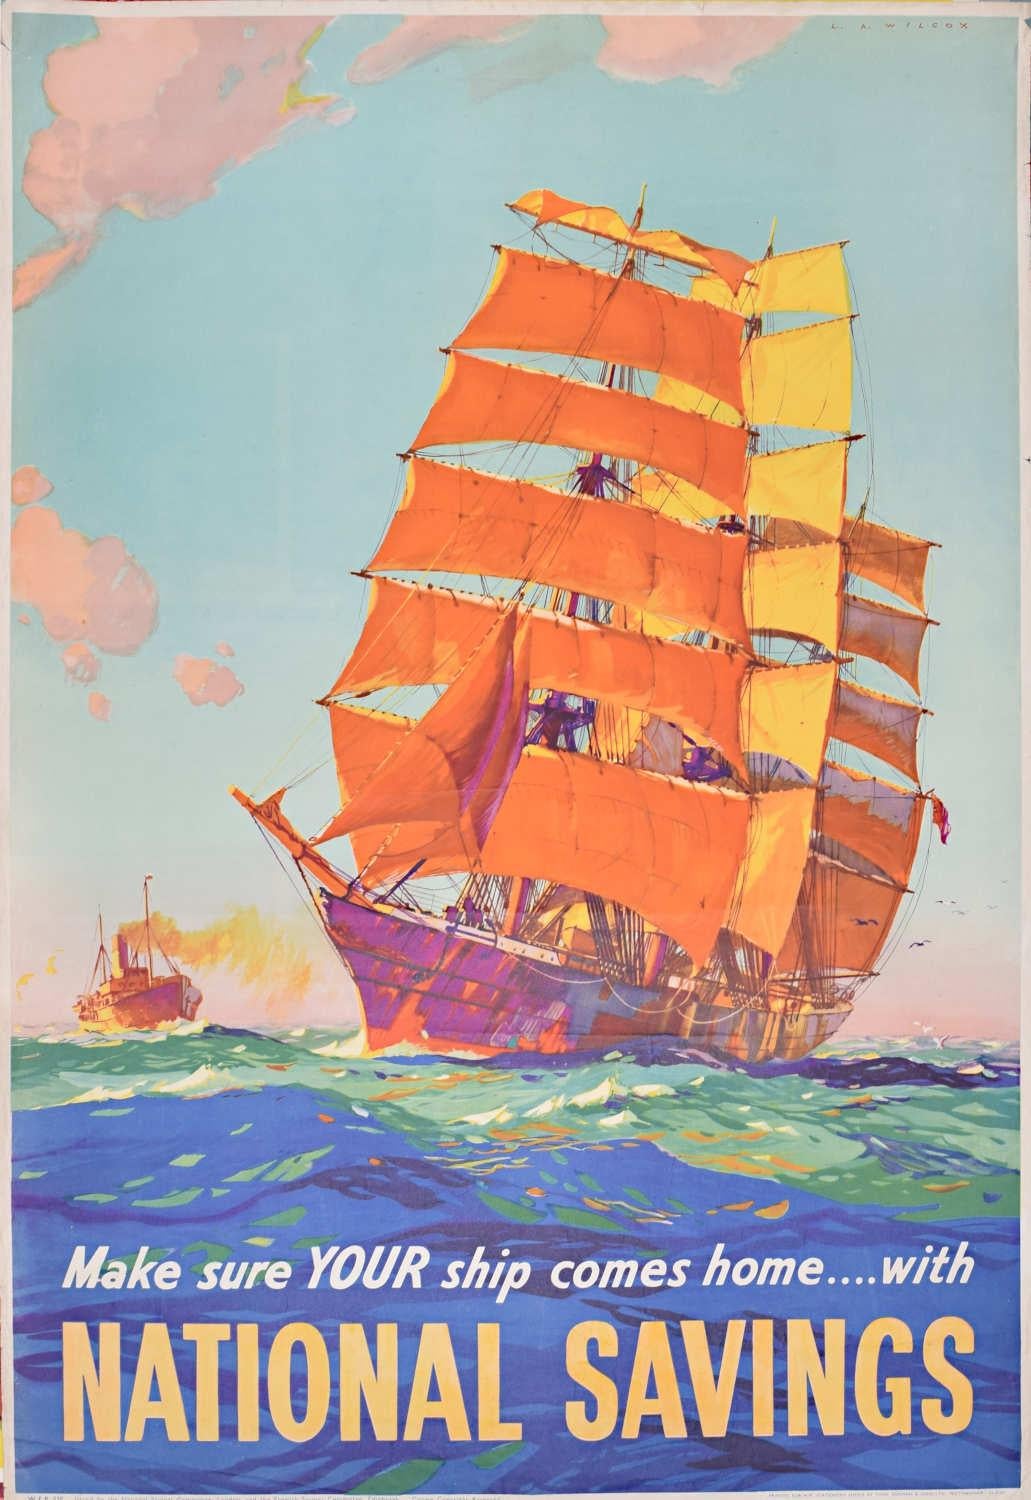 British National Savings Poster c. 1945 Leslie Wilcox Make Sure Your Ship Comes